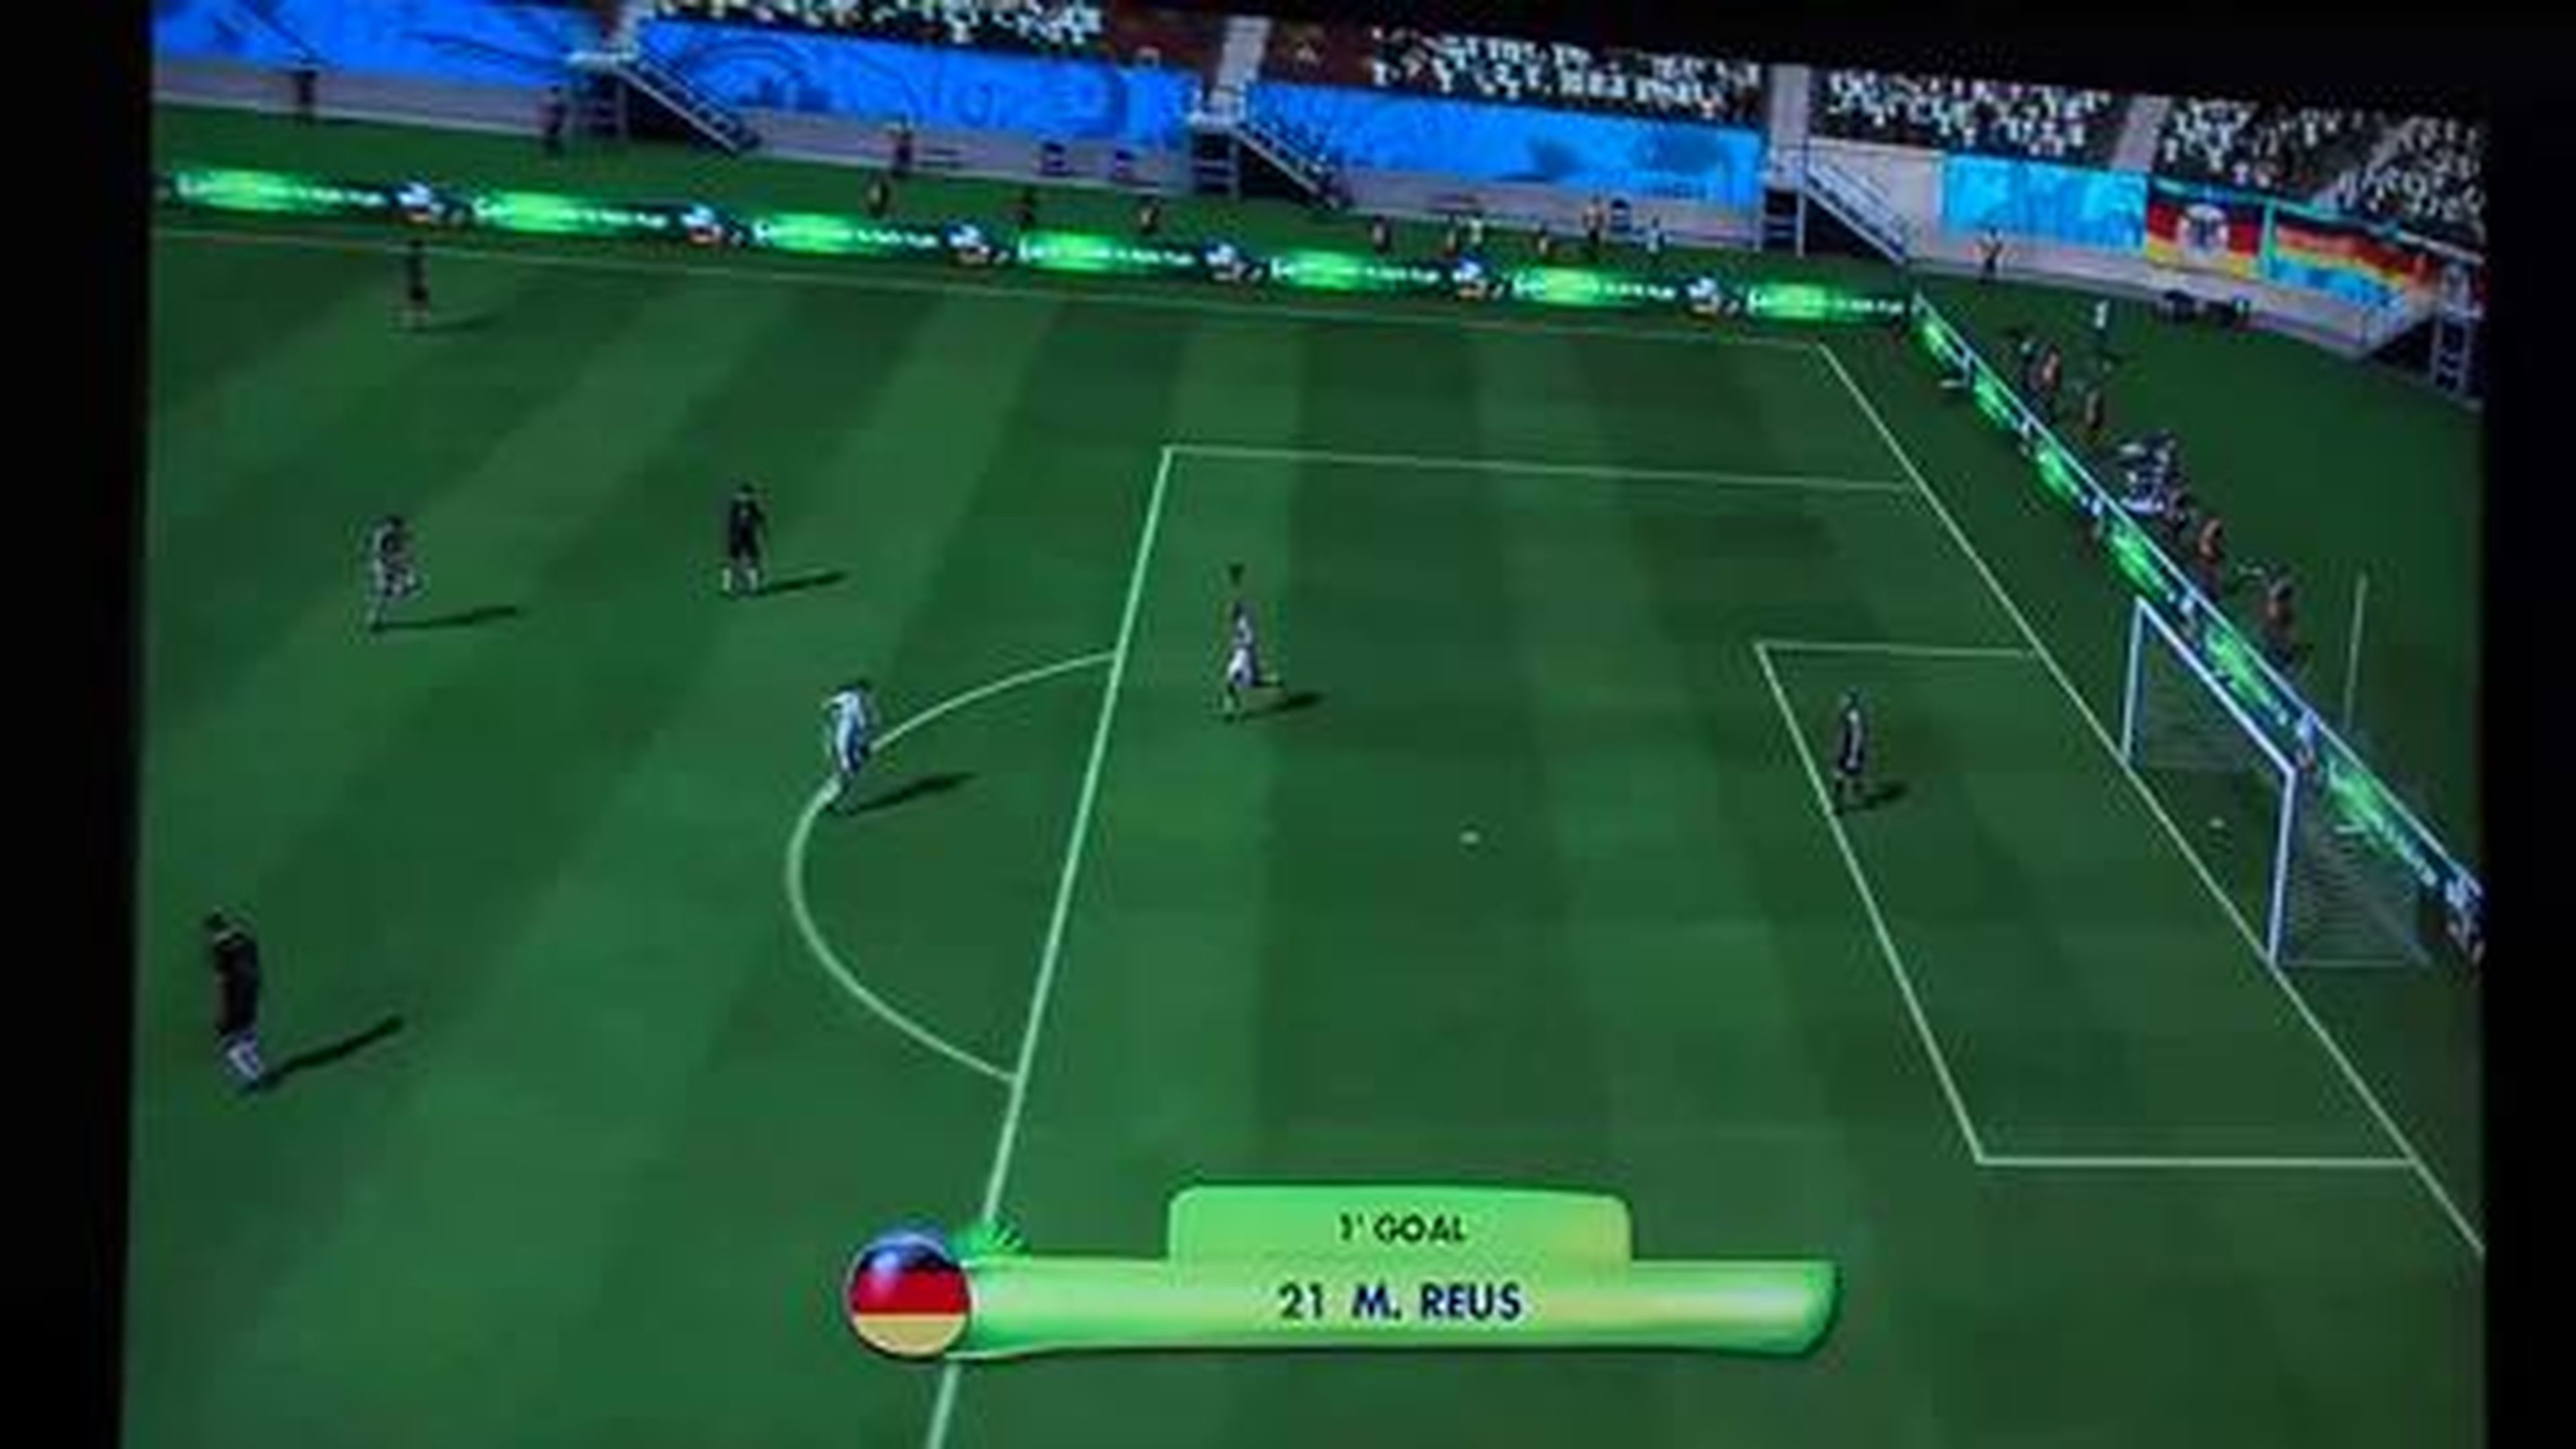 Gamer's Edition- Highest Score on FIFA World Cup 2014 - Guinness World Records 2015